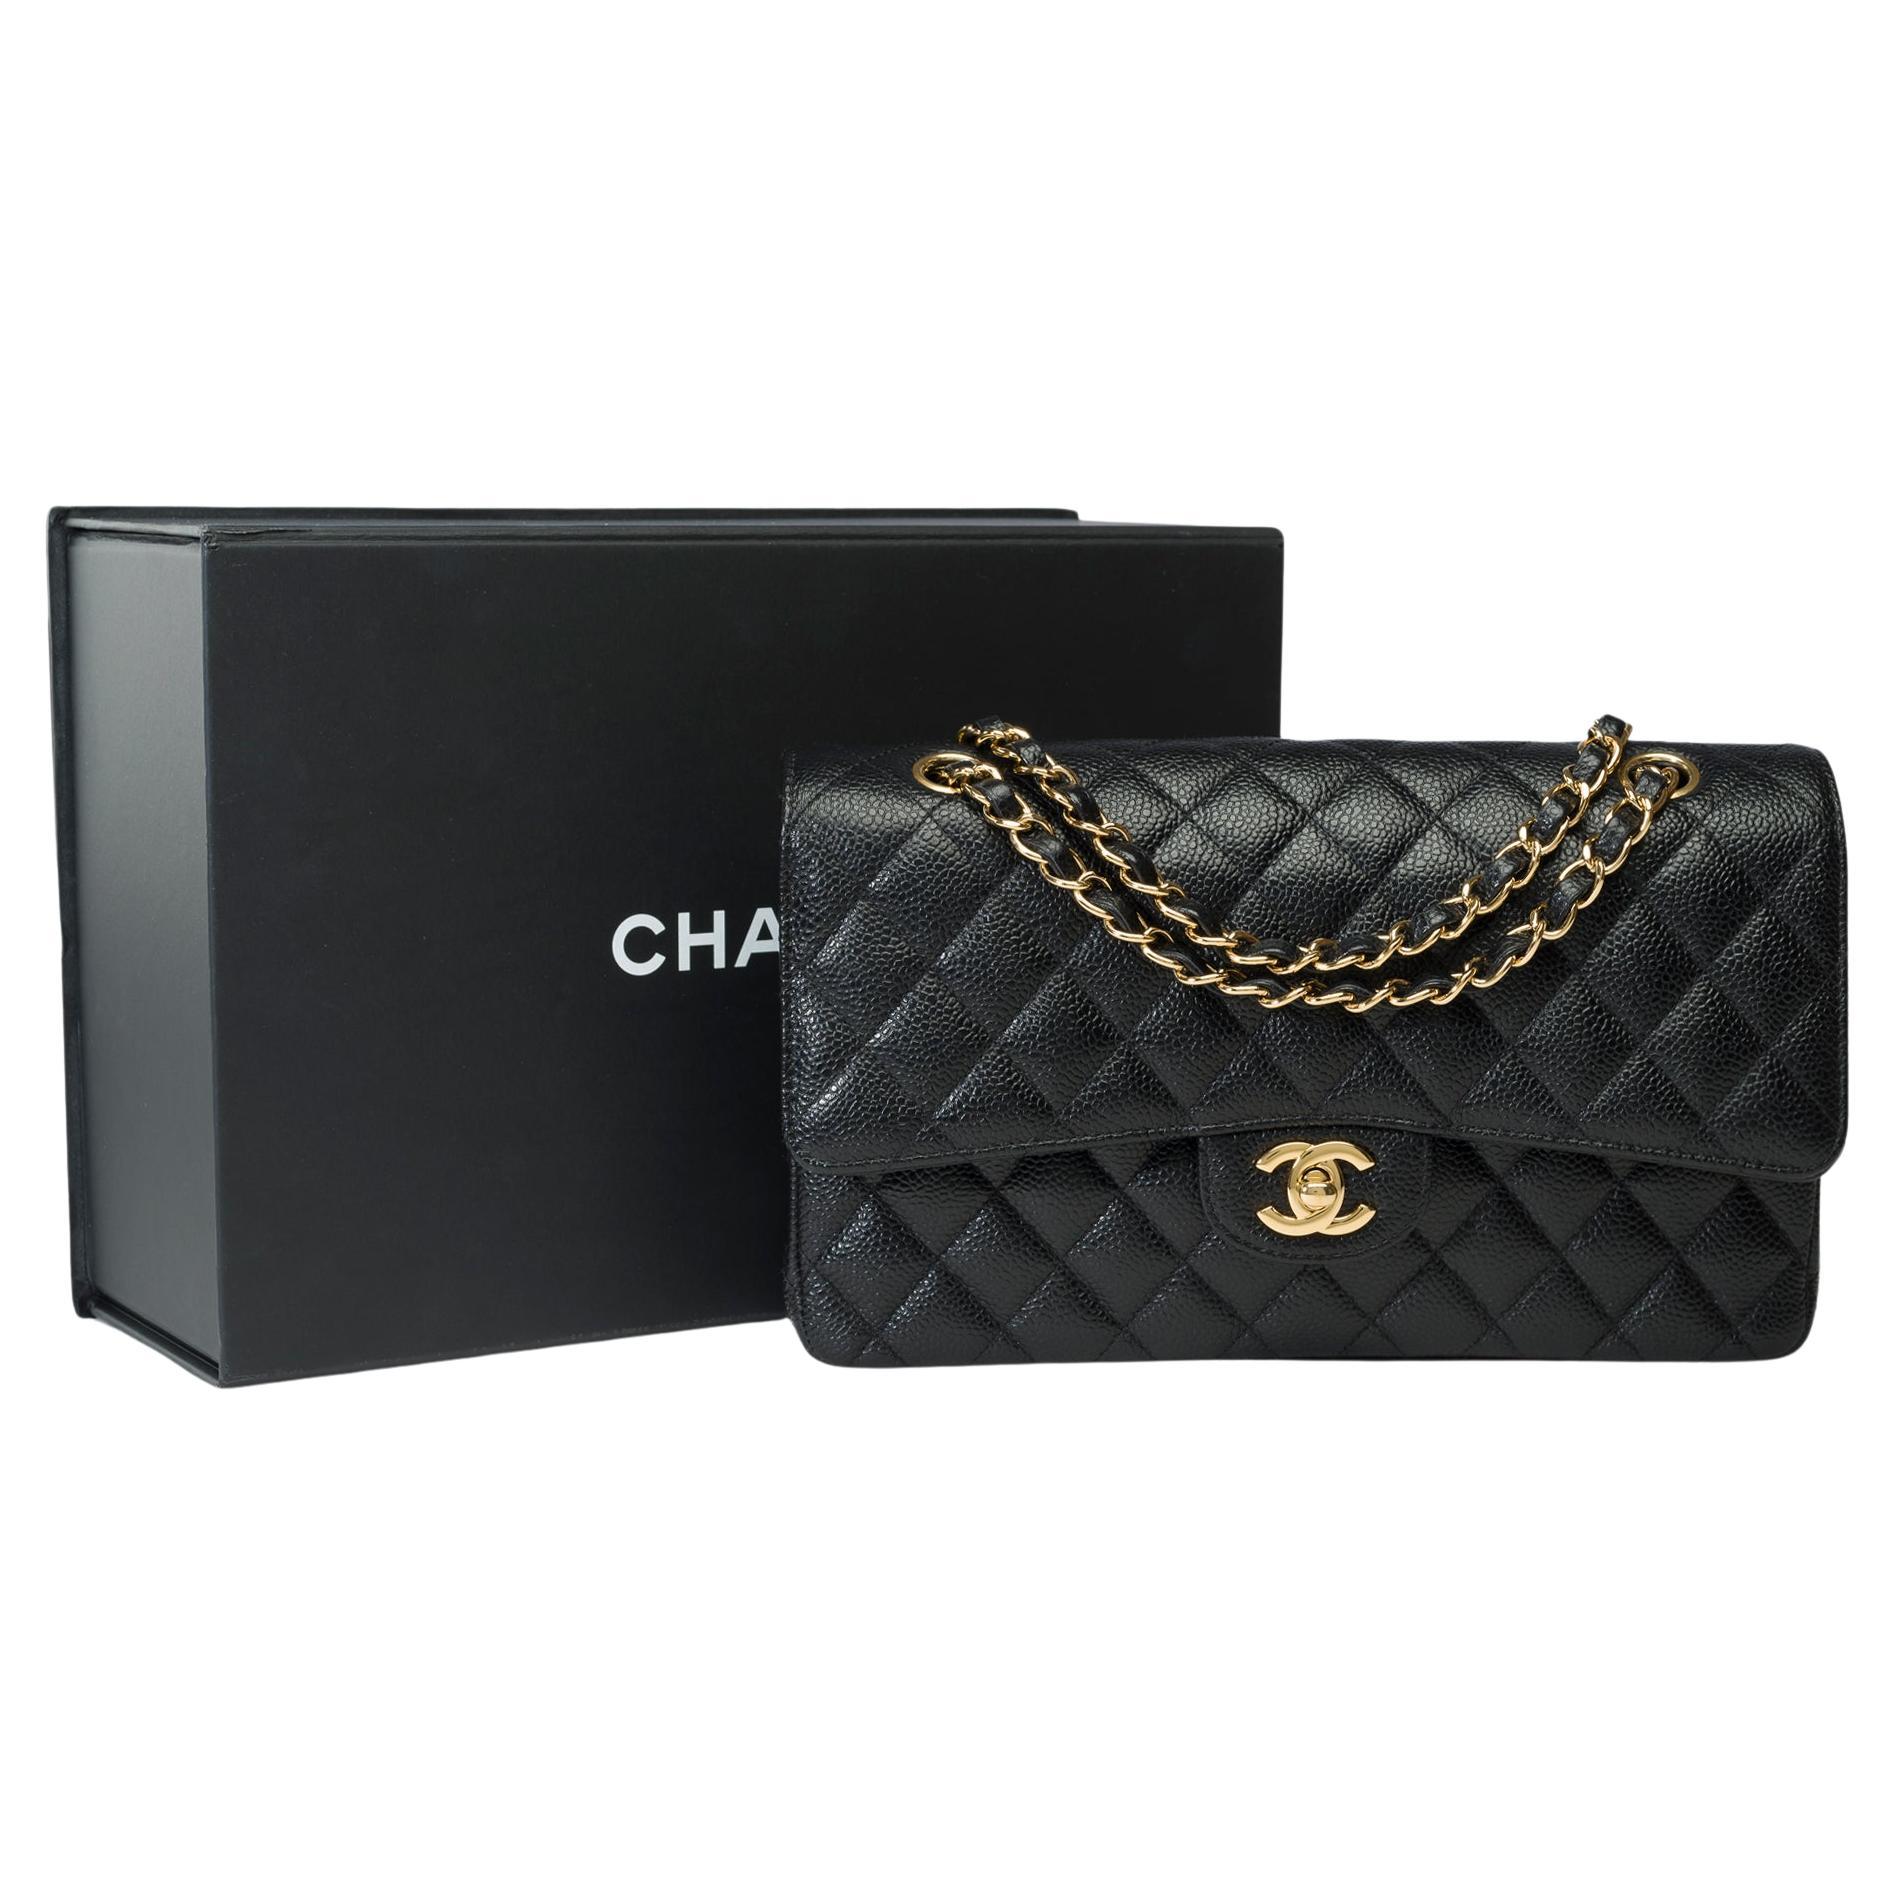 Chanel Timeless double flap shoulder bag in Black Quilted Caviar leather, GHW